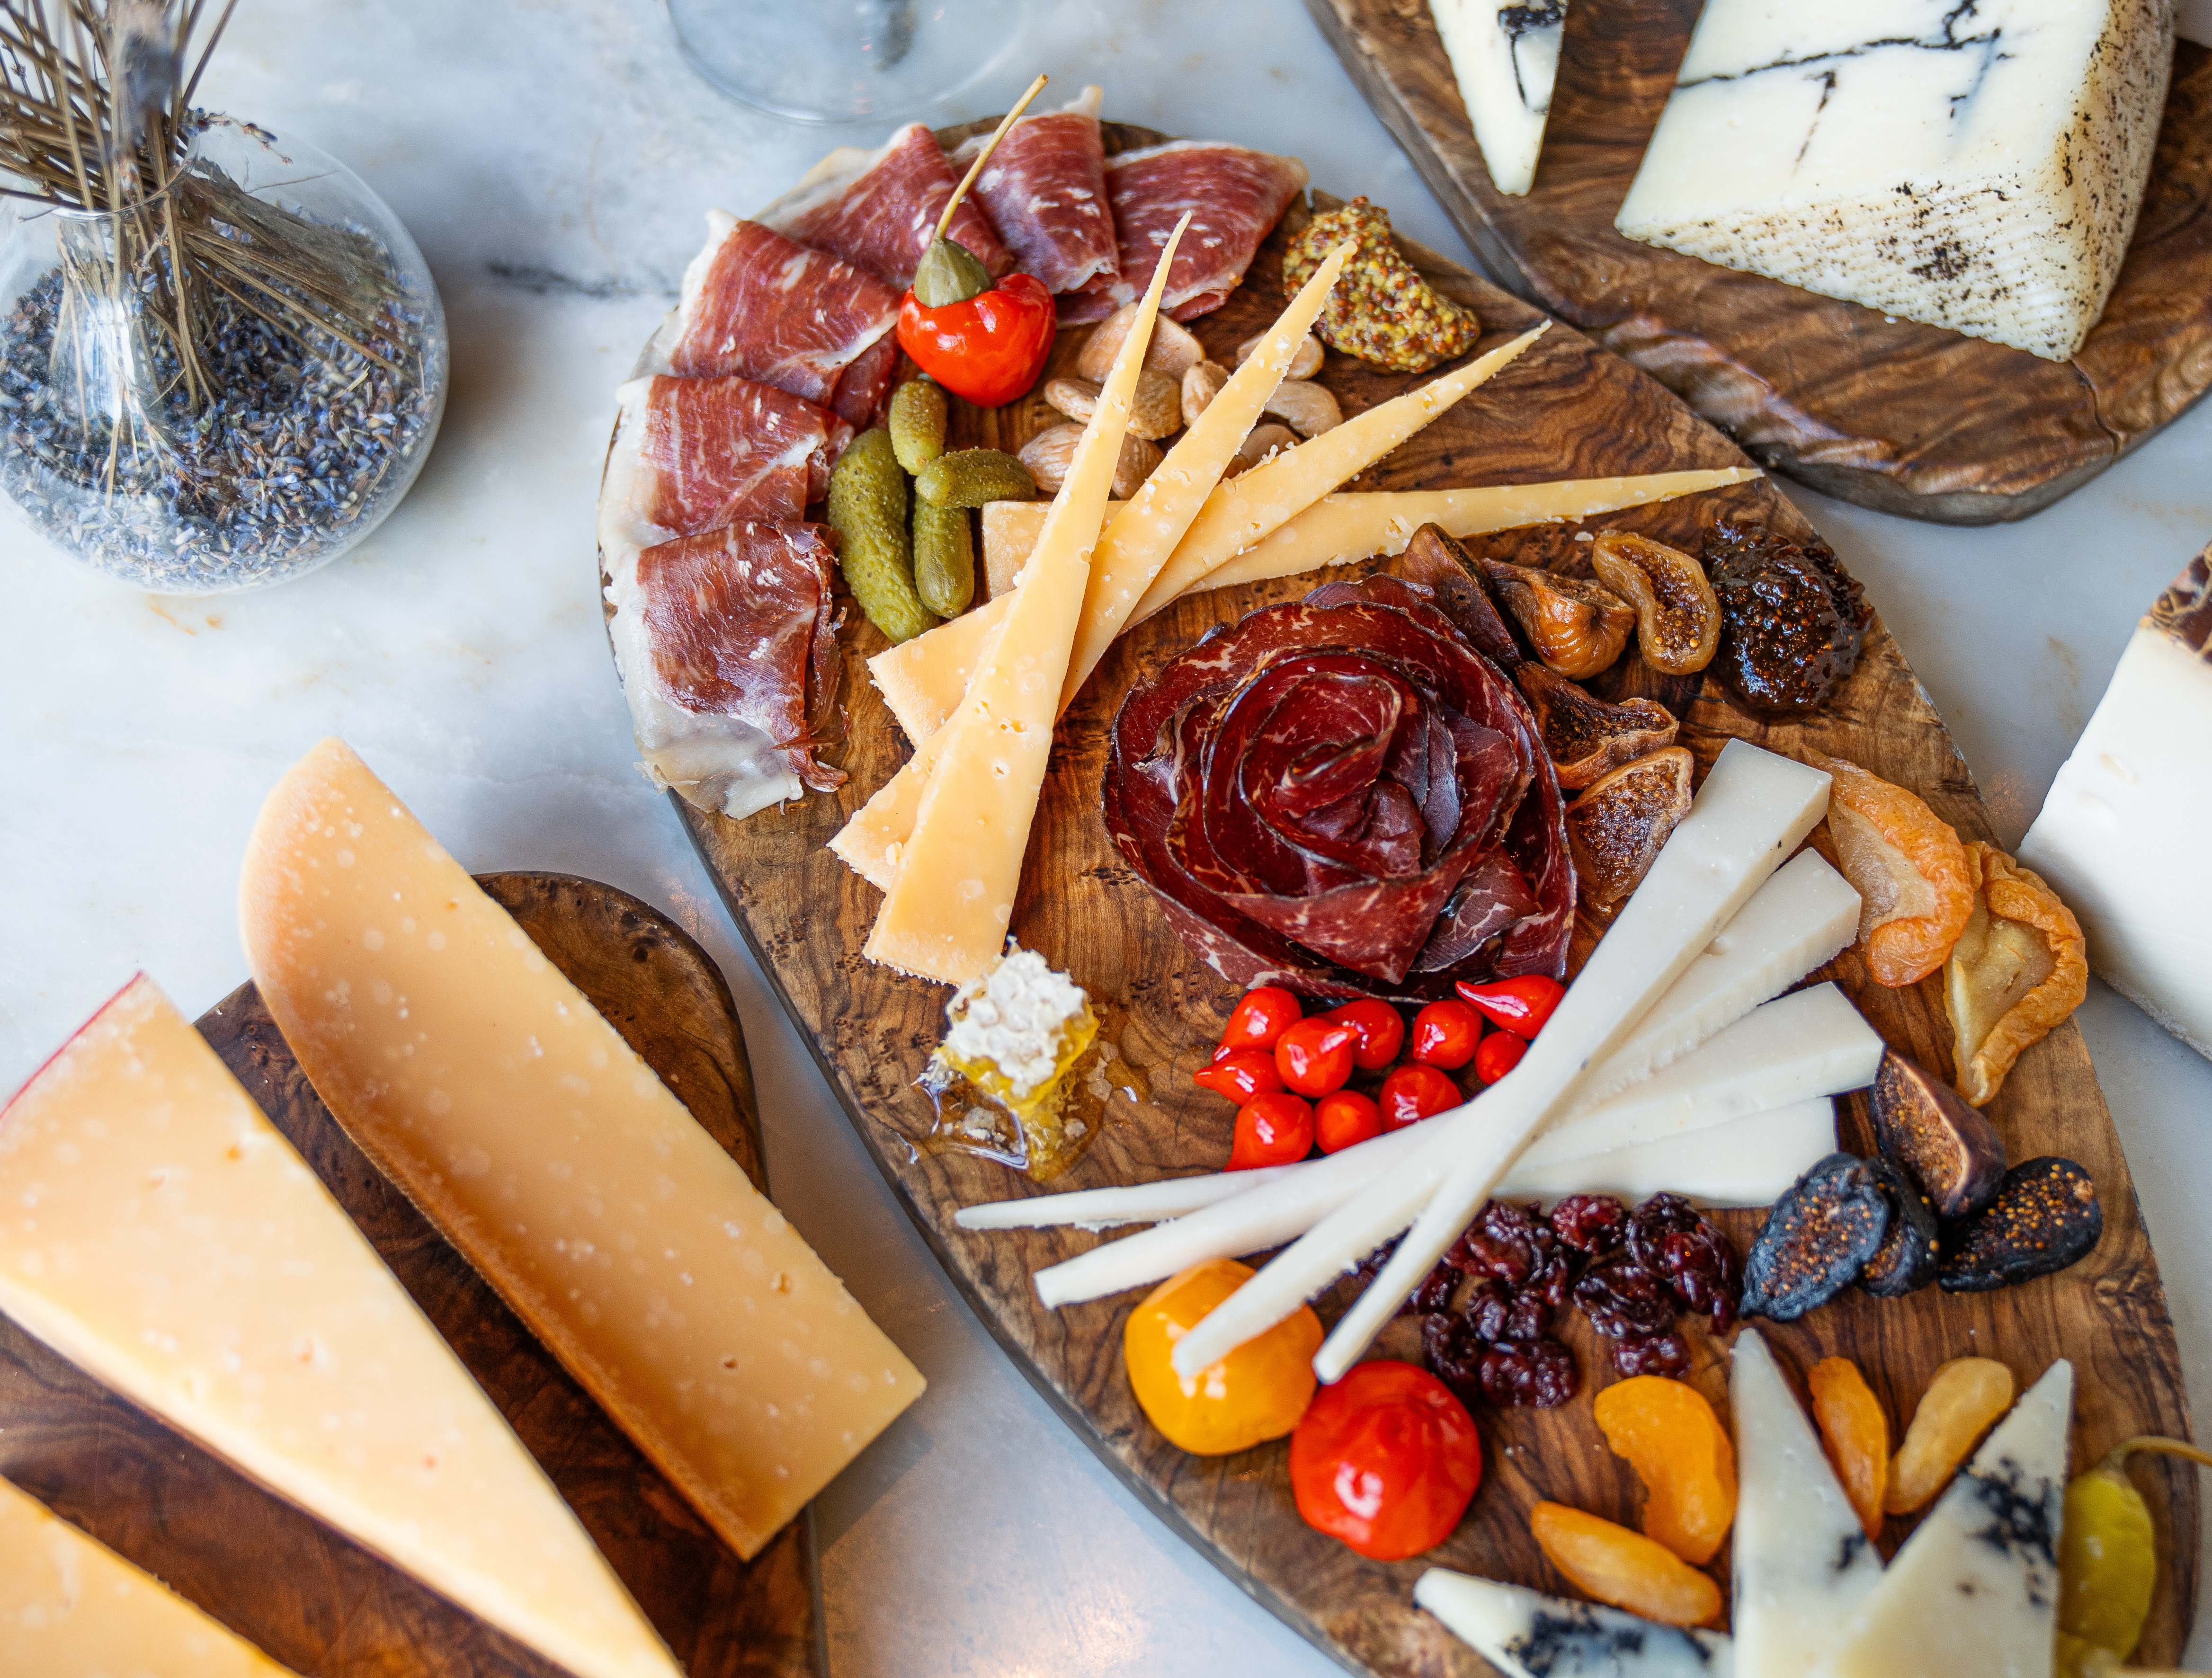 Gourmet cheese and charcuterie board at Wally's